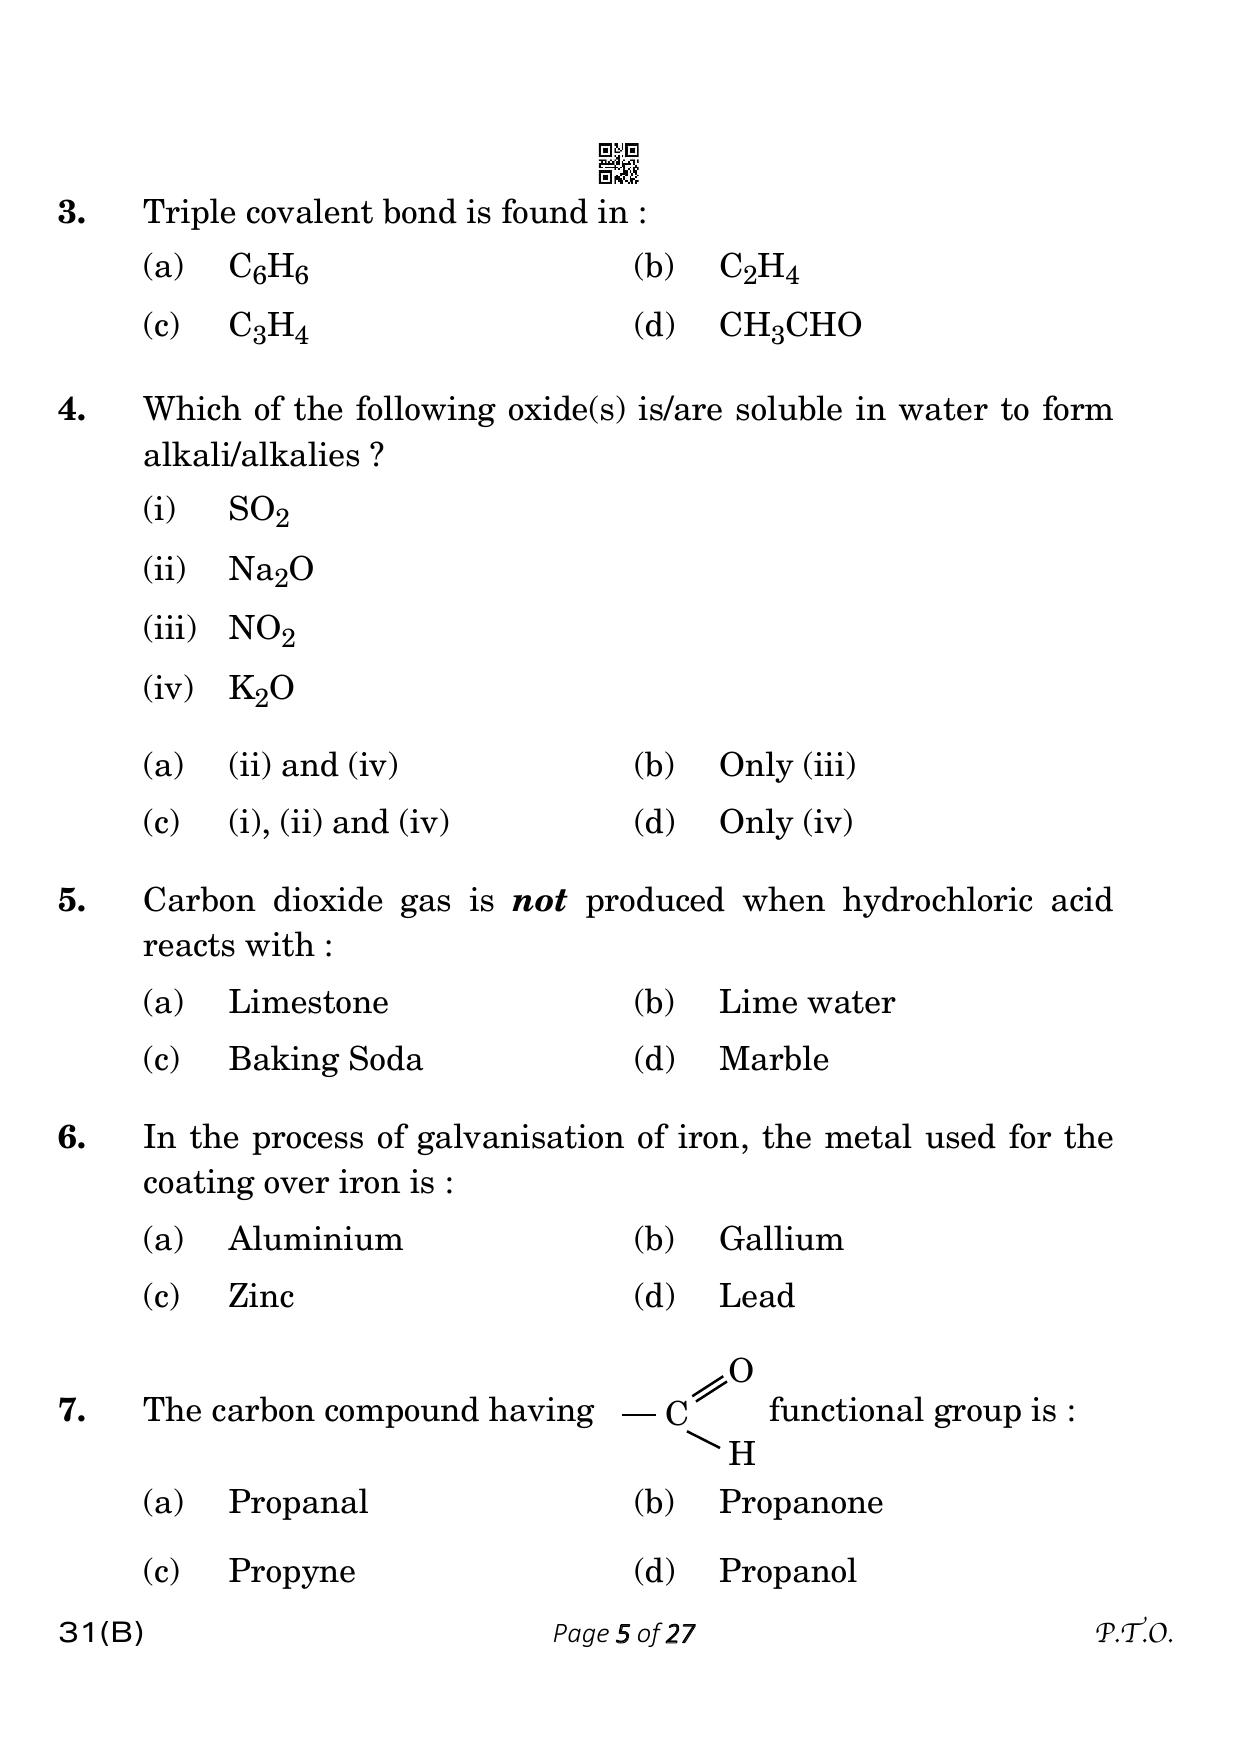 CBSE Class 10 31-B Science 2023 (Compartment) Question Paper - Page 5